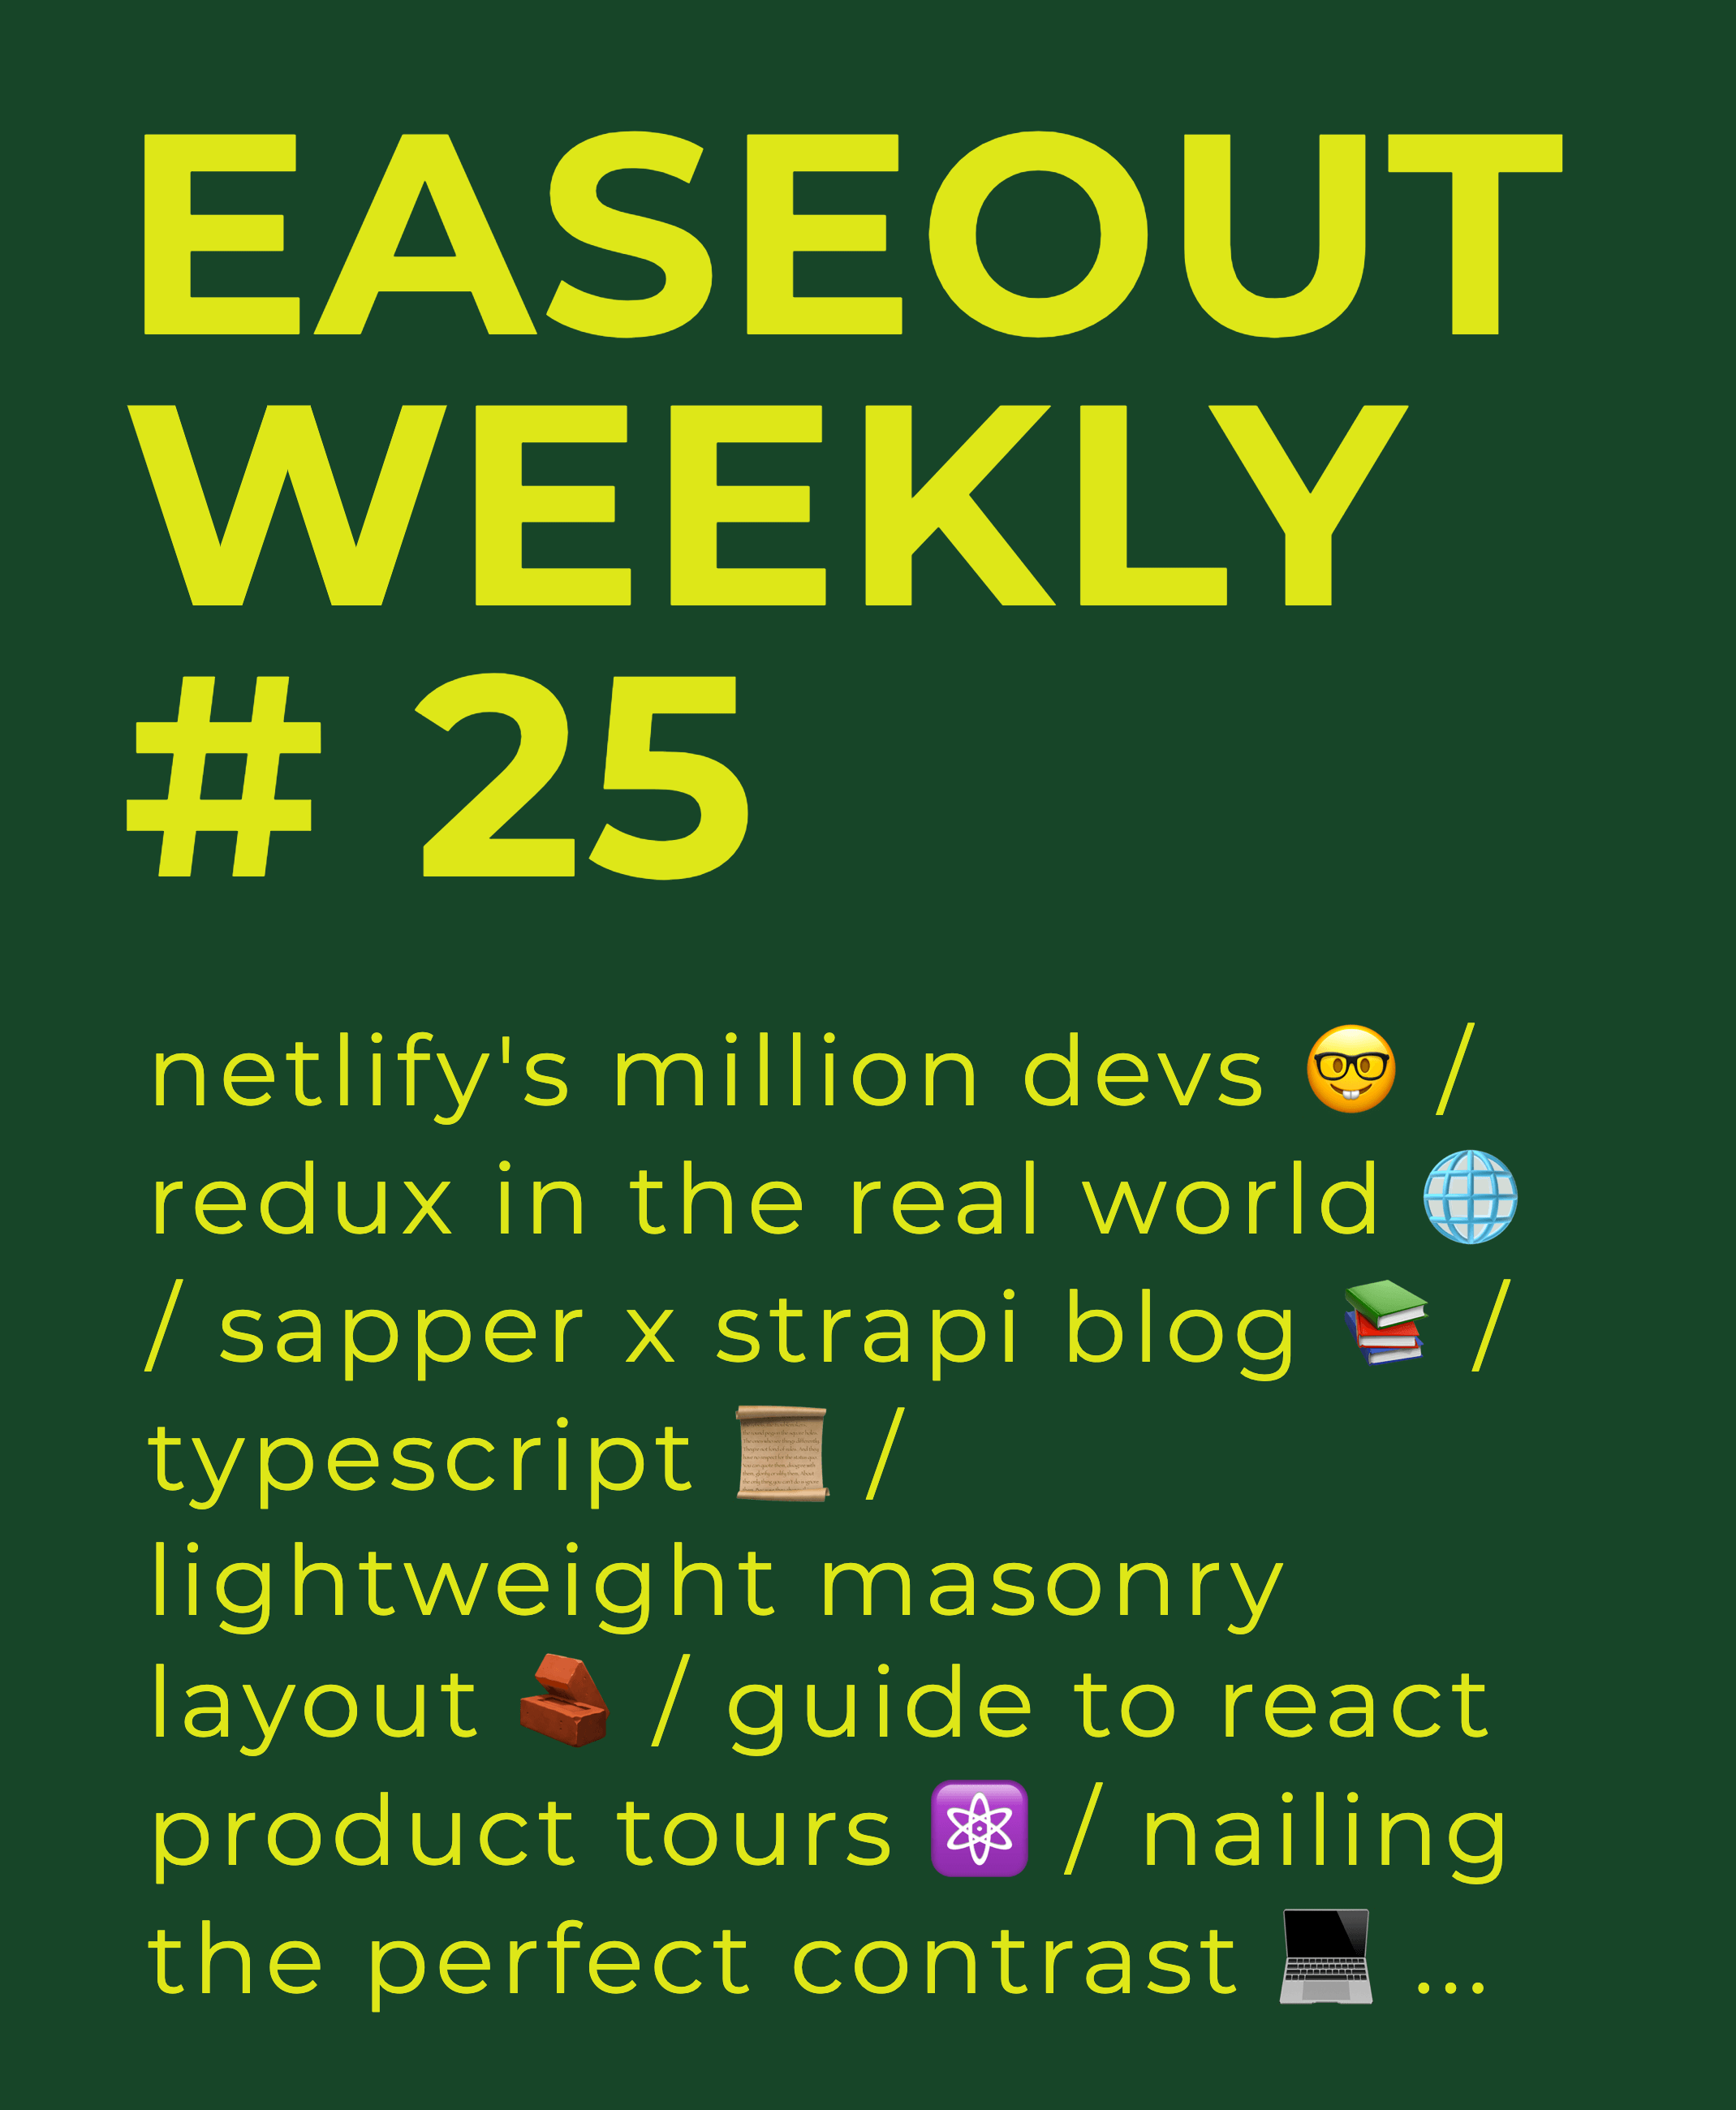 Easeout Weekly #25